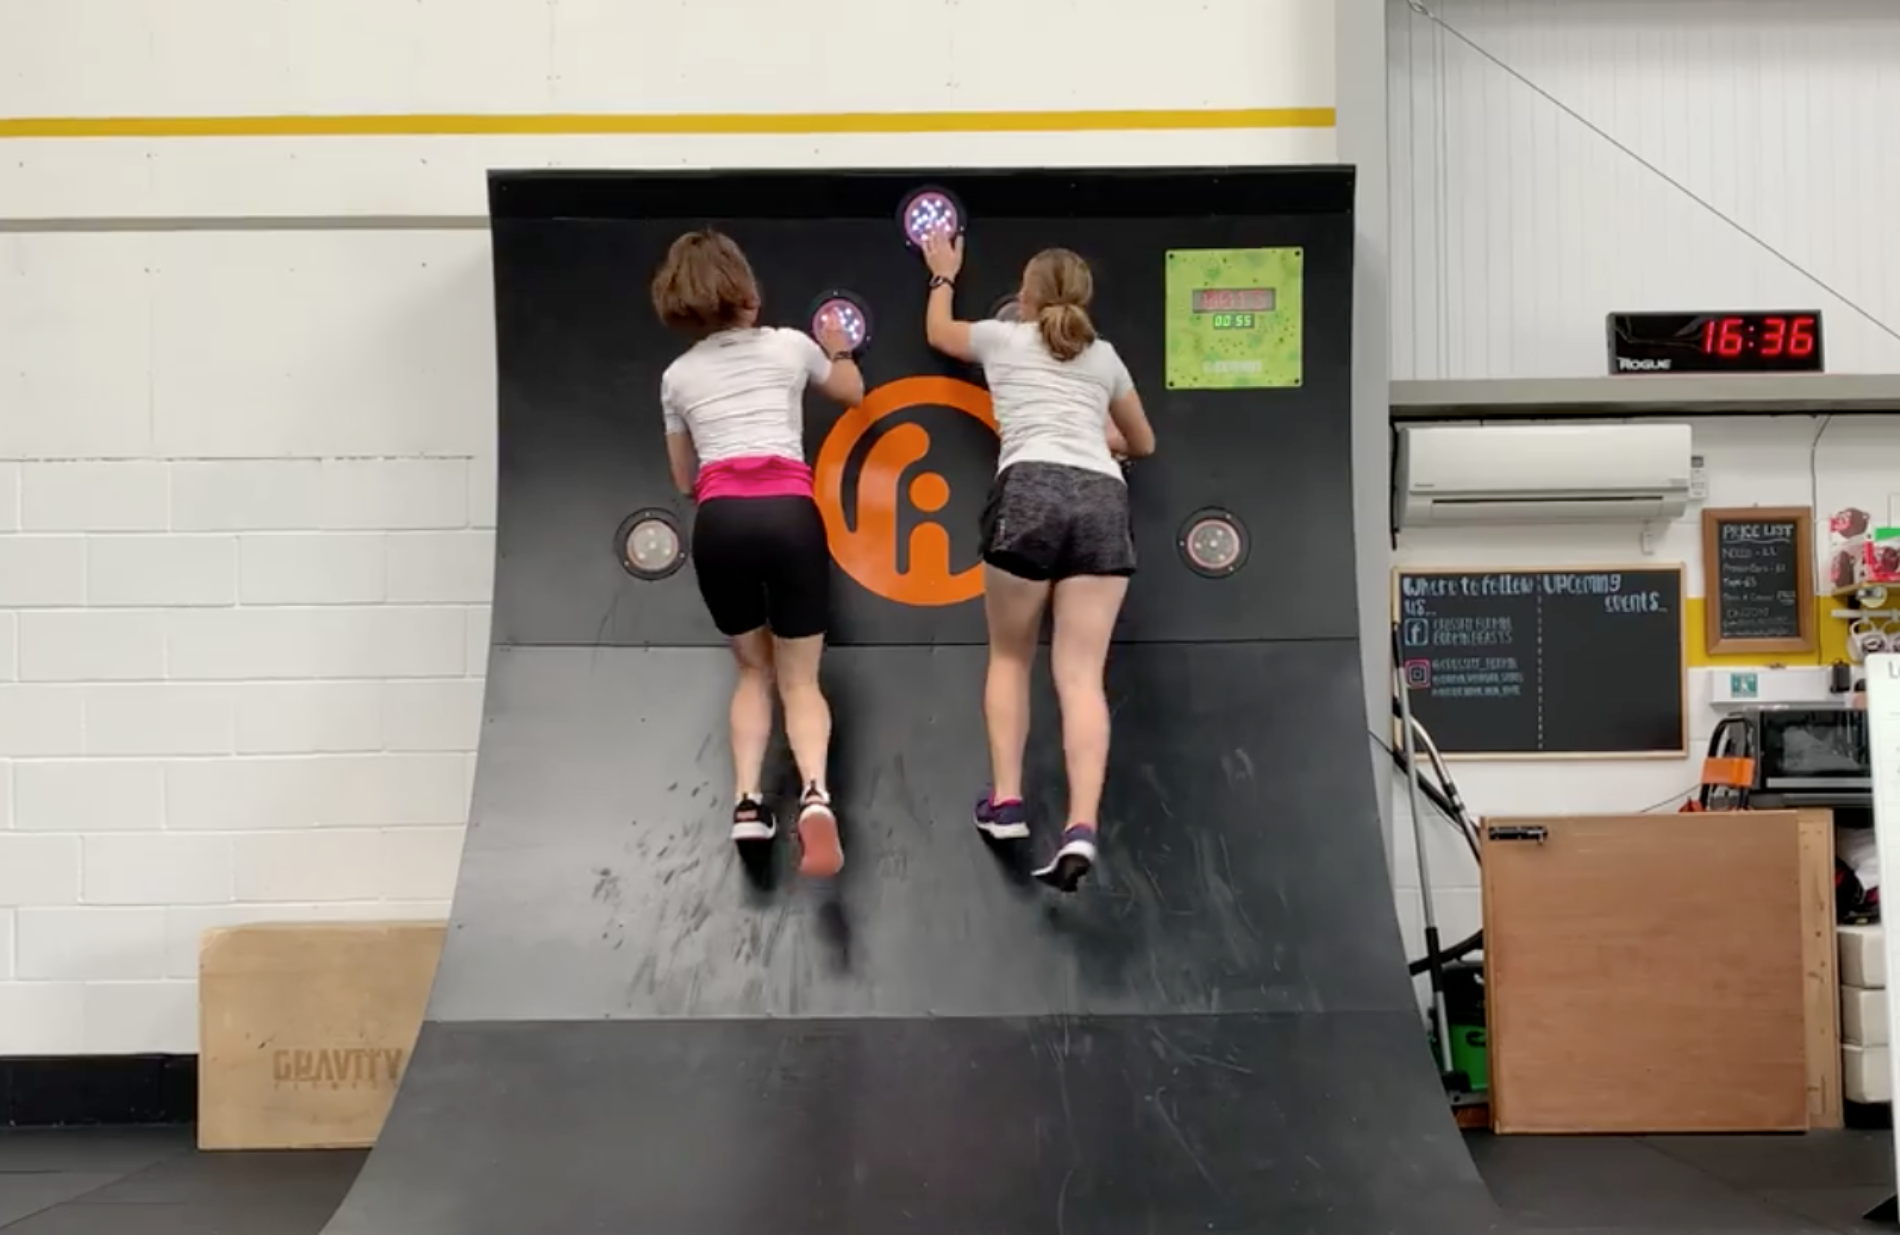 Interactive warped wall. How many times can you reach the top?